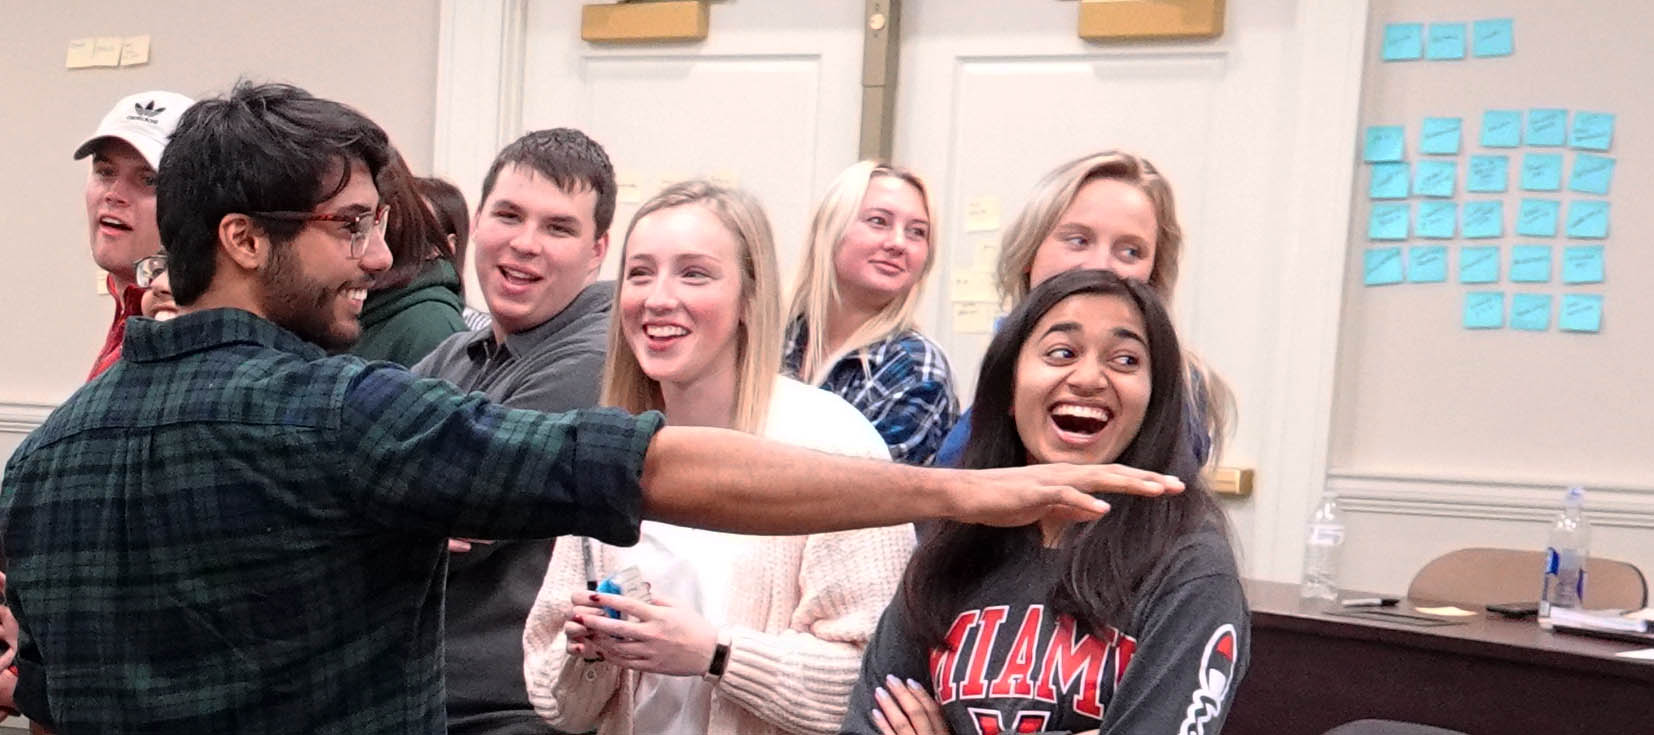  Male student pointing as female students laugh